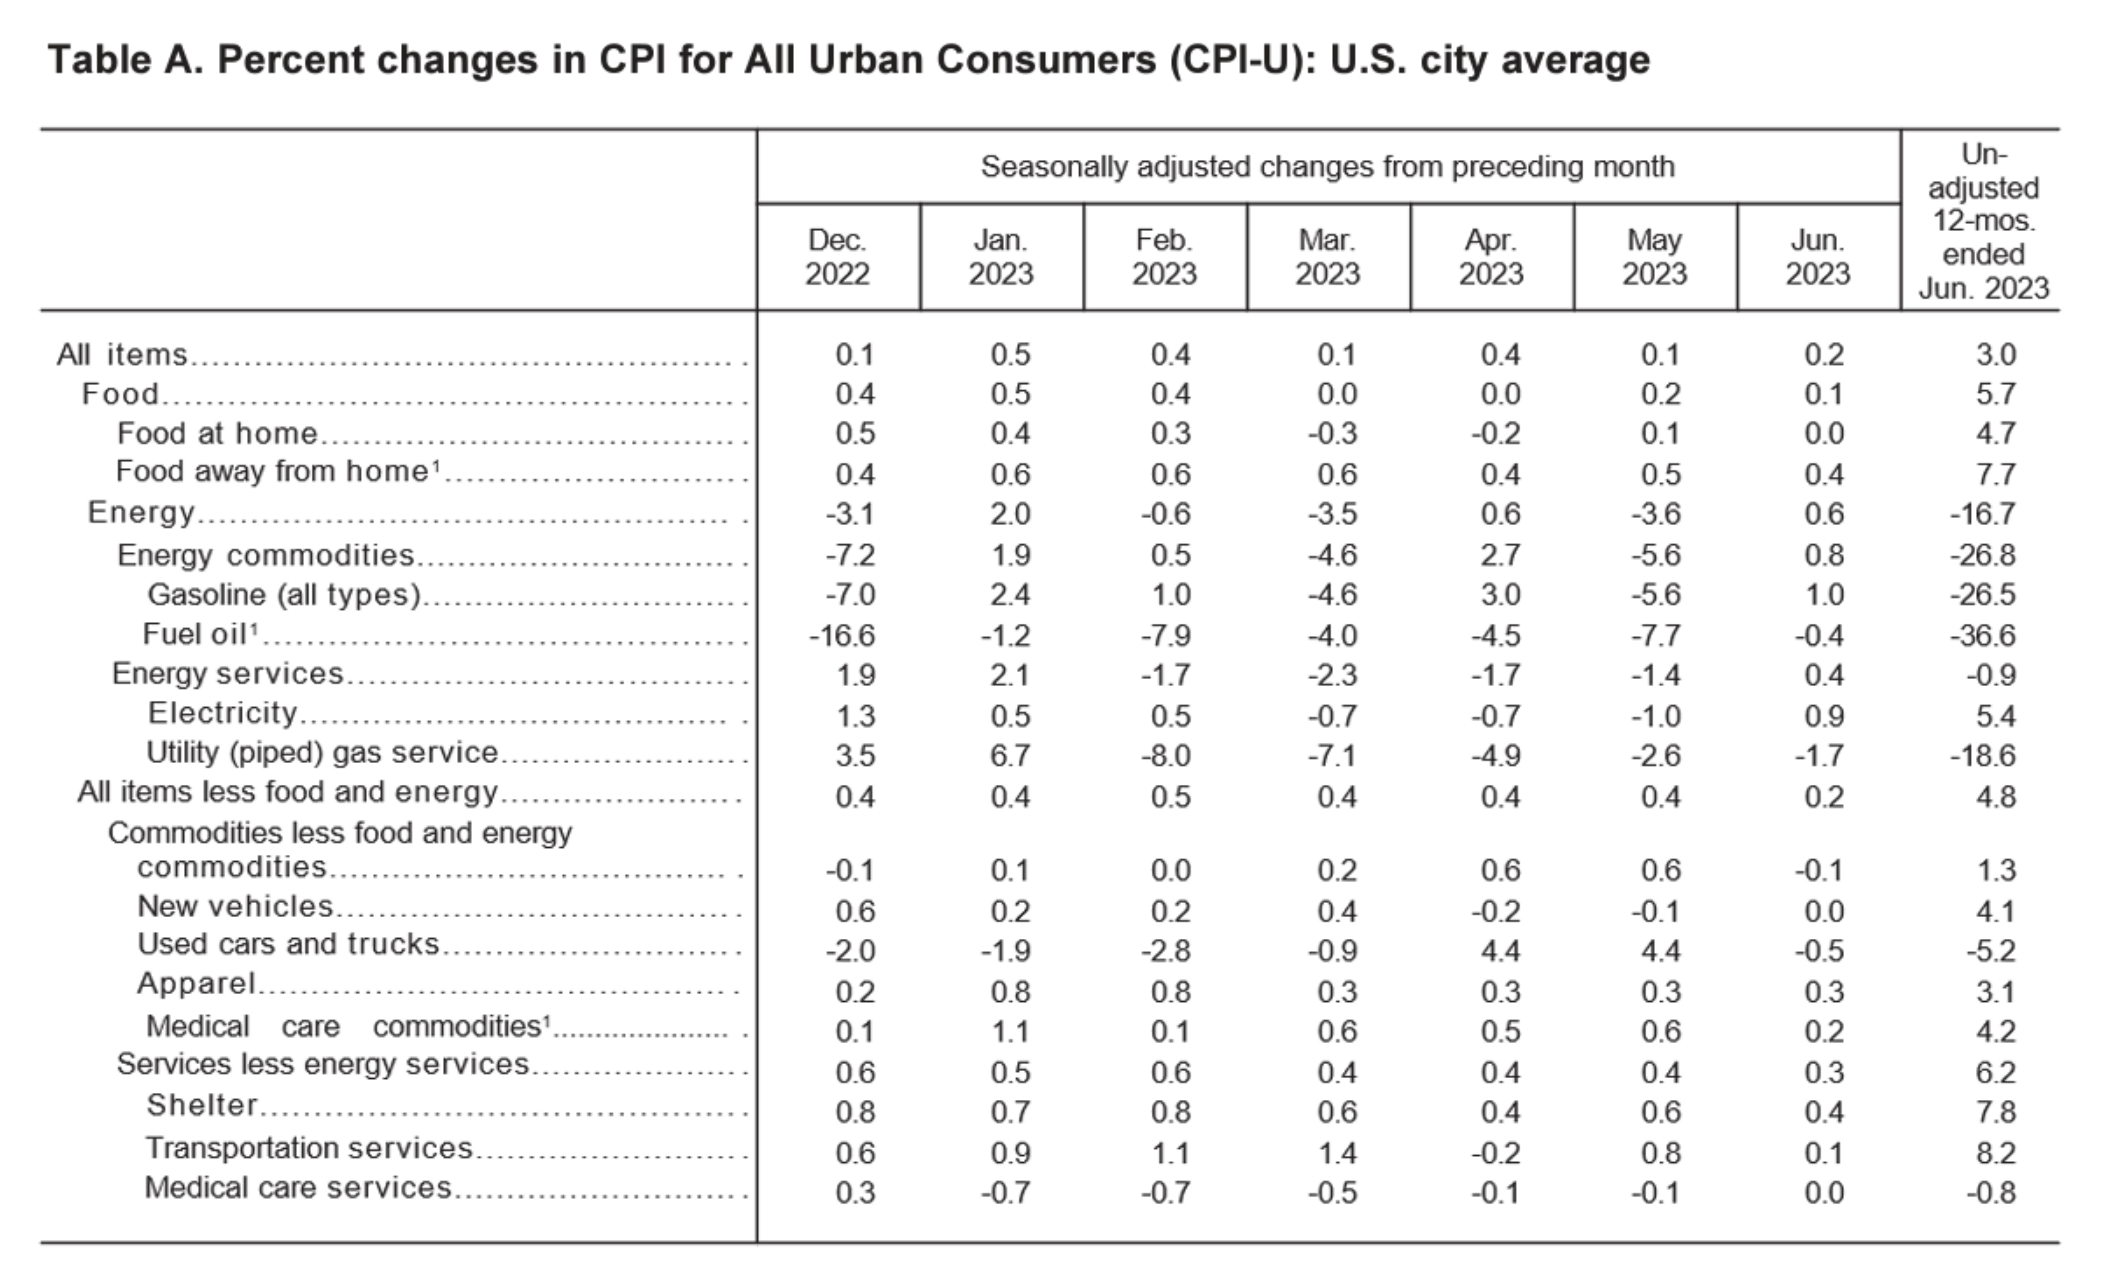 The Consumer Price Index Rose 0.2 Seasonally Adjusted in June and Rose 3.0 Annually CPI